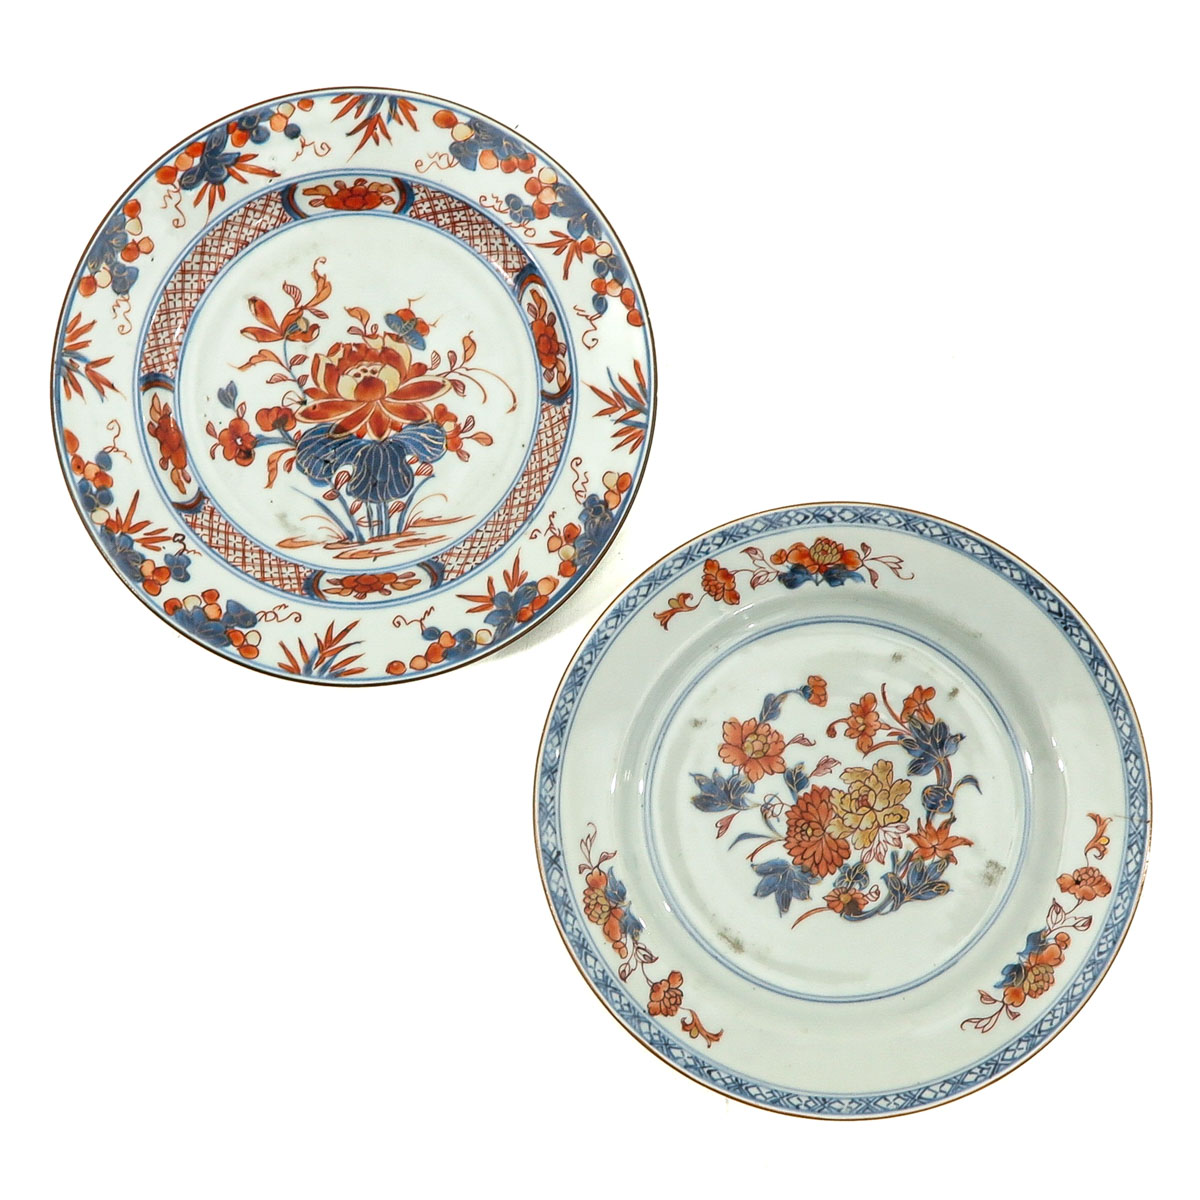 A Collection of 5 Imari Plates - Image 5 of 10